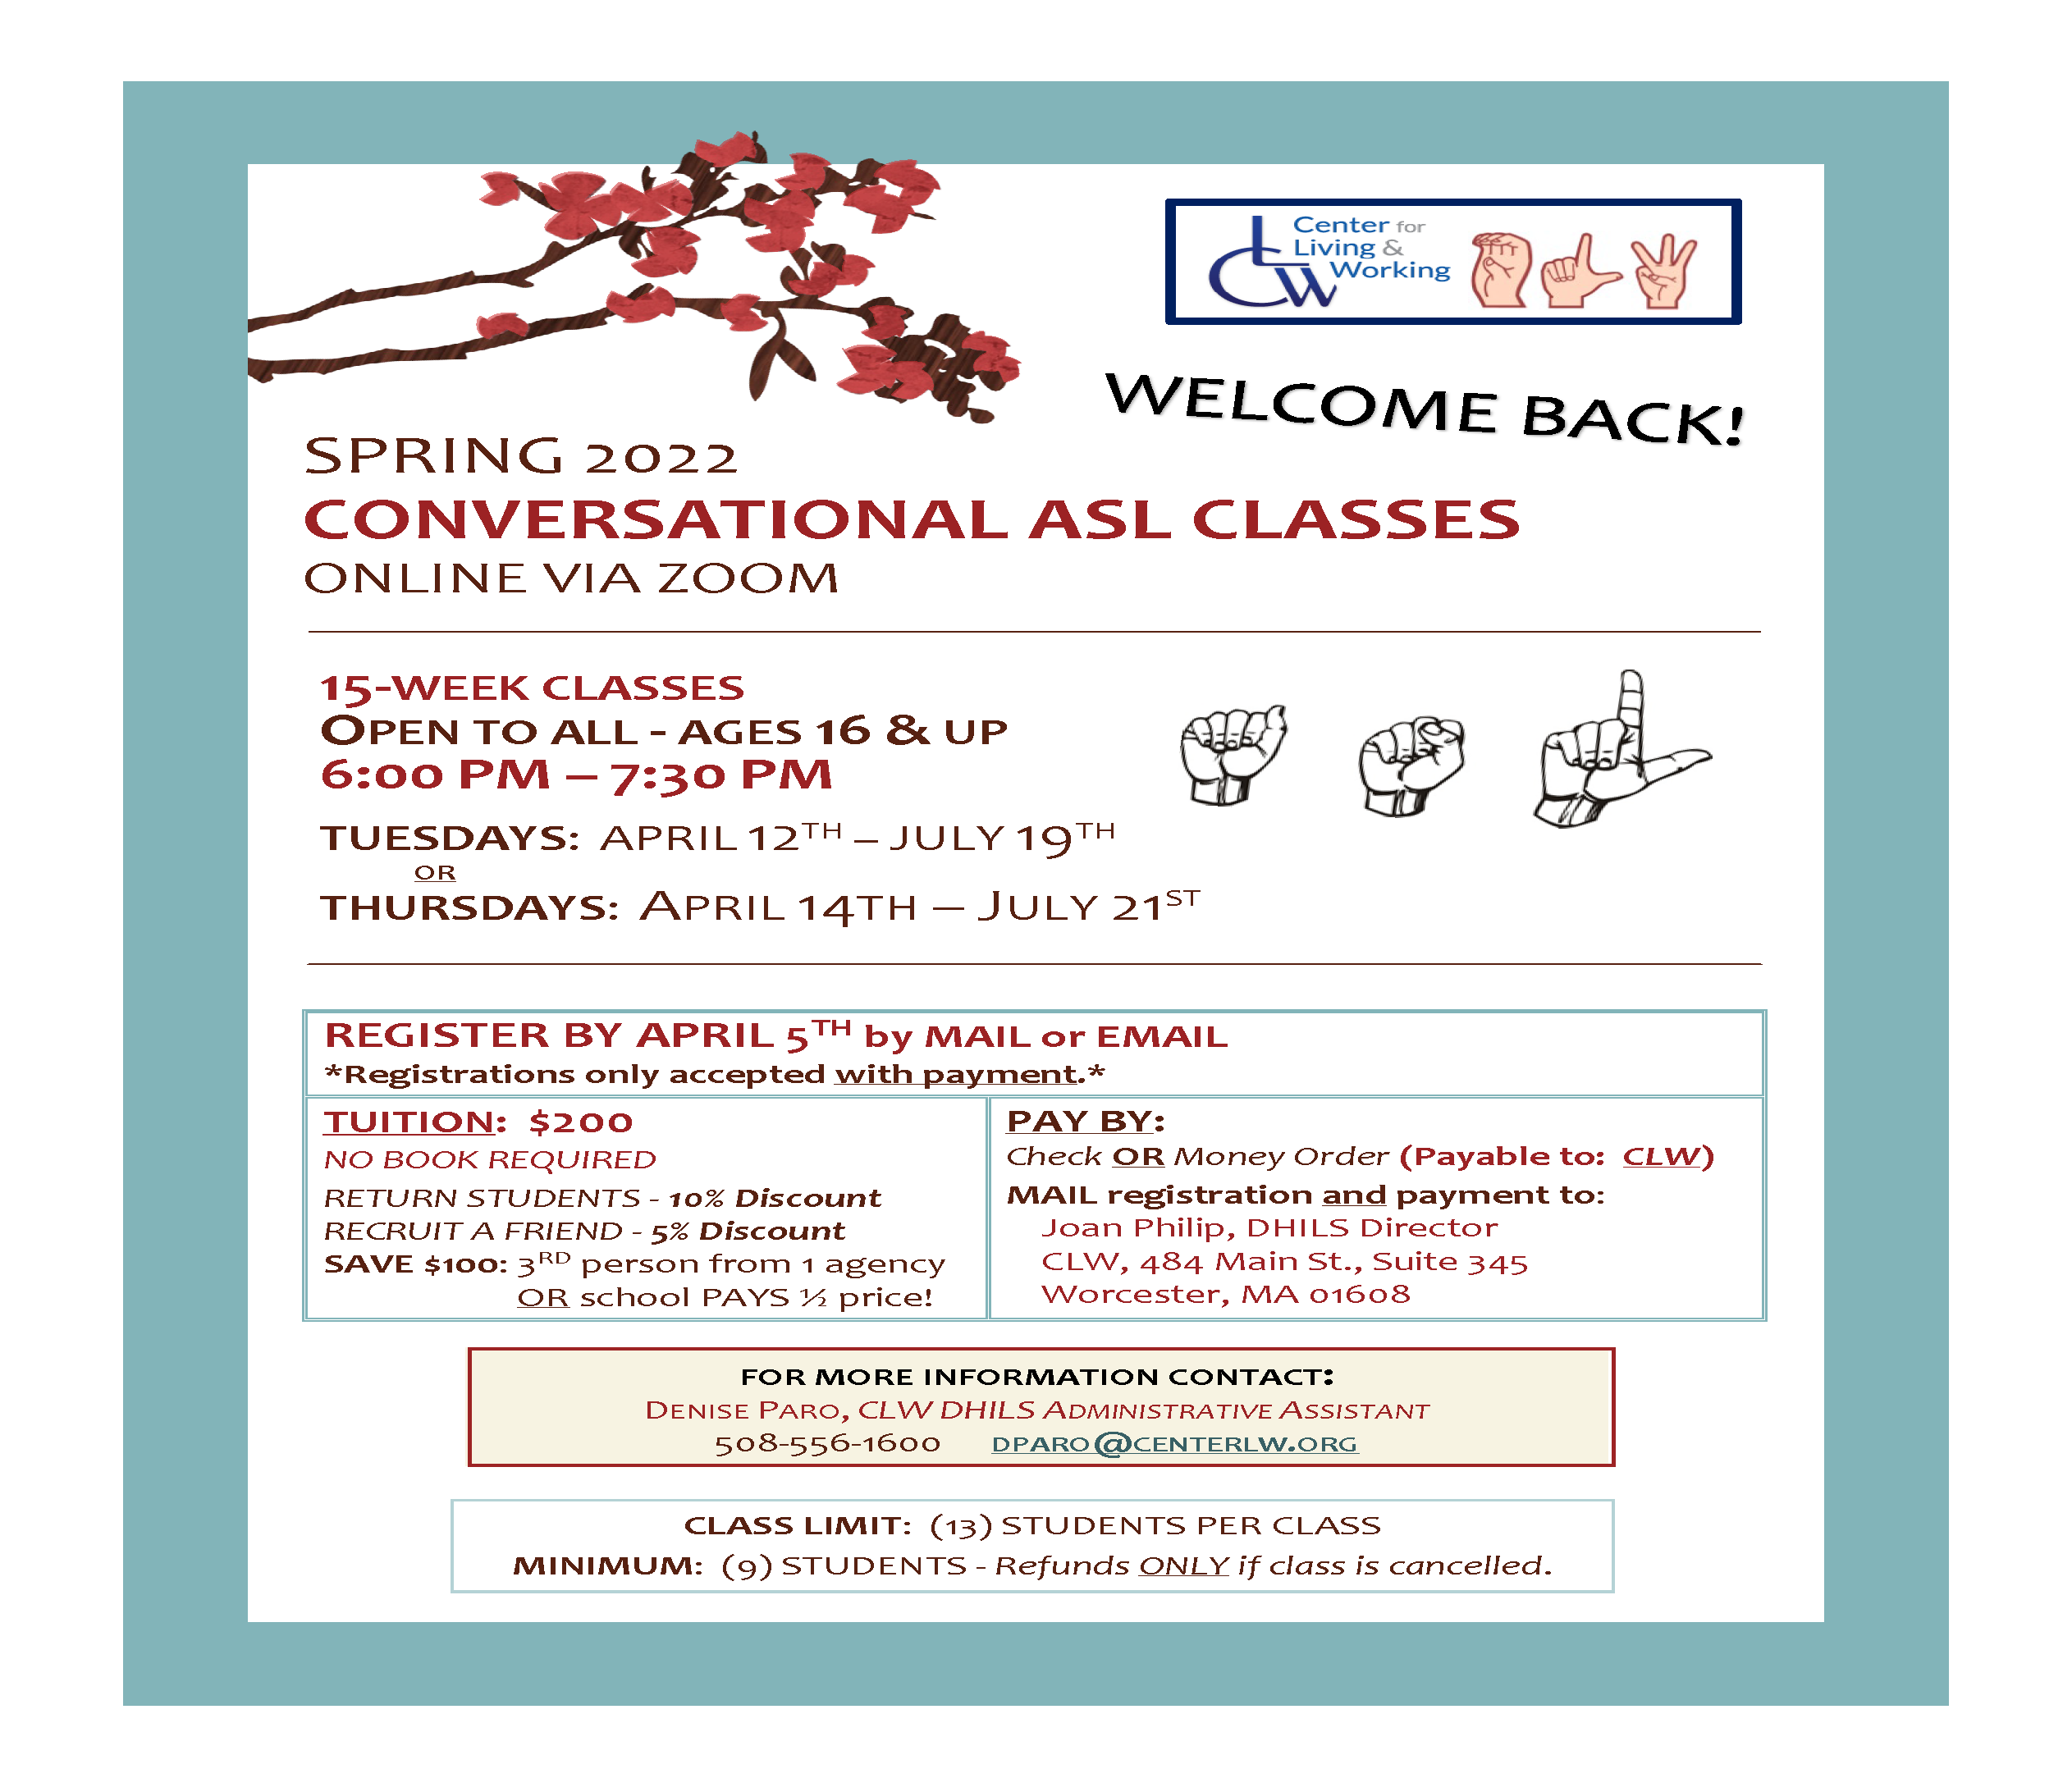 Conversational ASL Class Flyer for Spring 2022 Classes at CLW